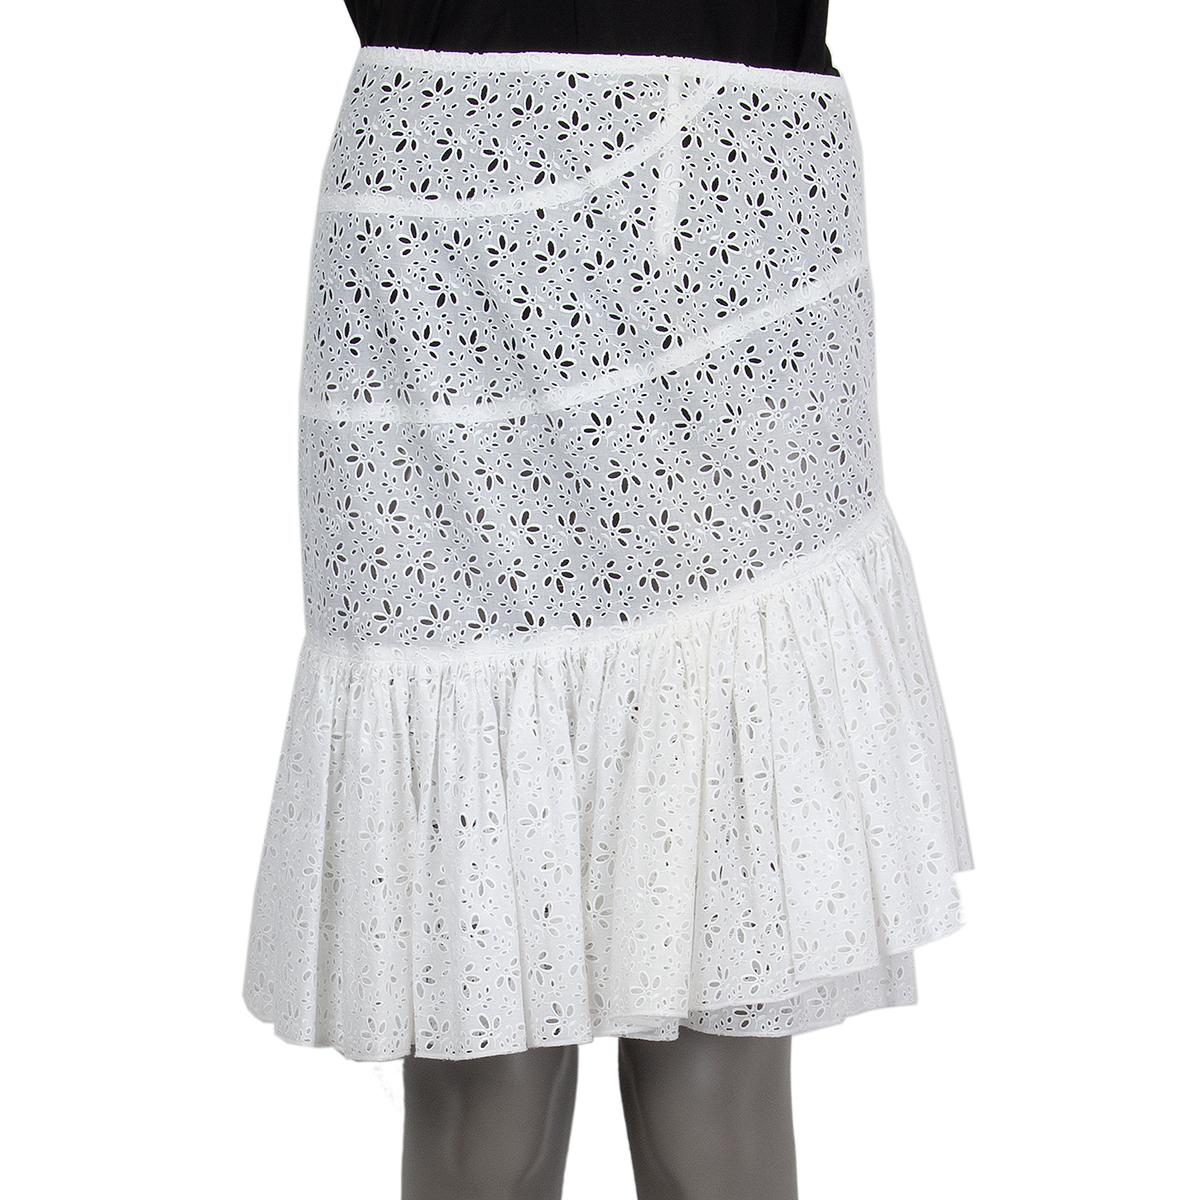 Alaïa ruched broderie anglaise skirt in white cotton (100%). Opens with 8 push-buttons in the back. Has been worn and is in excellent condition. 

Tag Size 40
Size M
Waist 72cm (28.1in)
Hips 92cm (35.9in)
Length 52cm (20.3in)